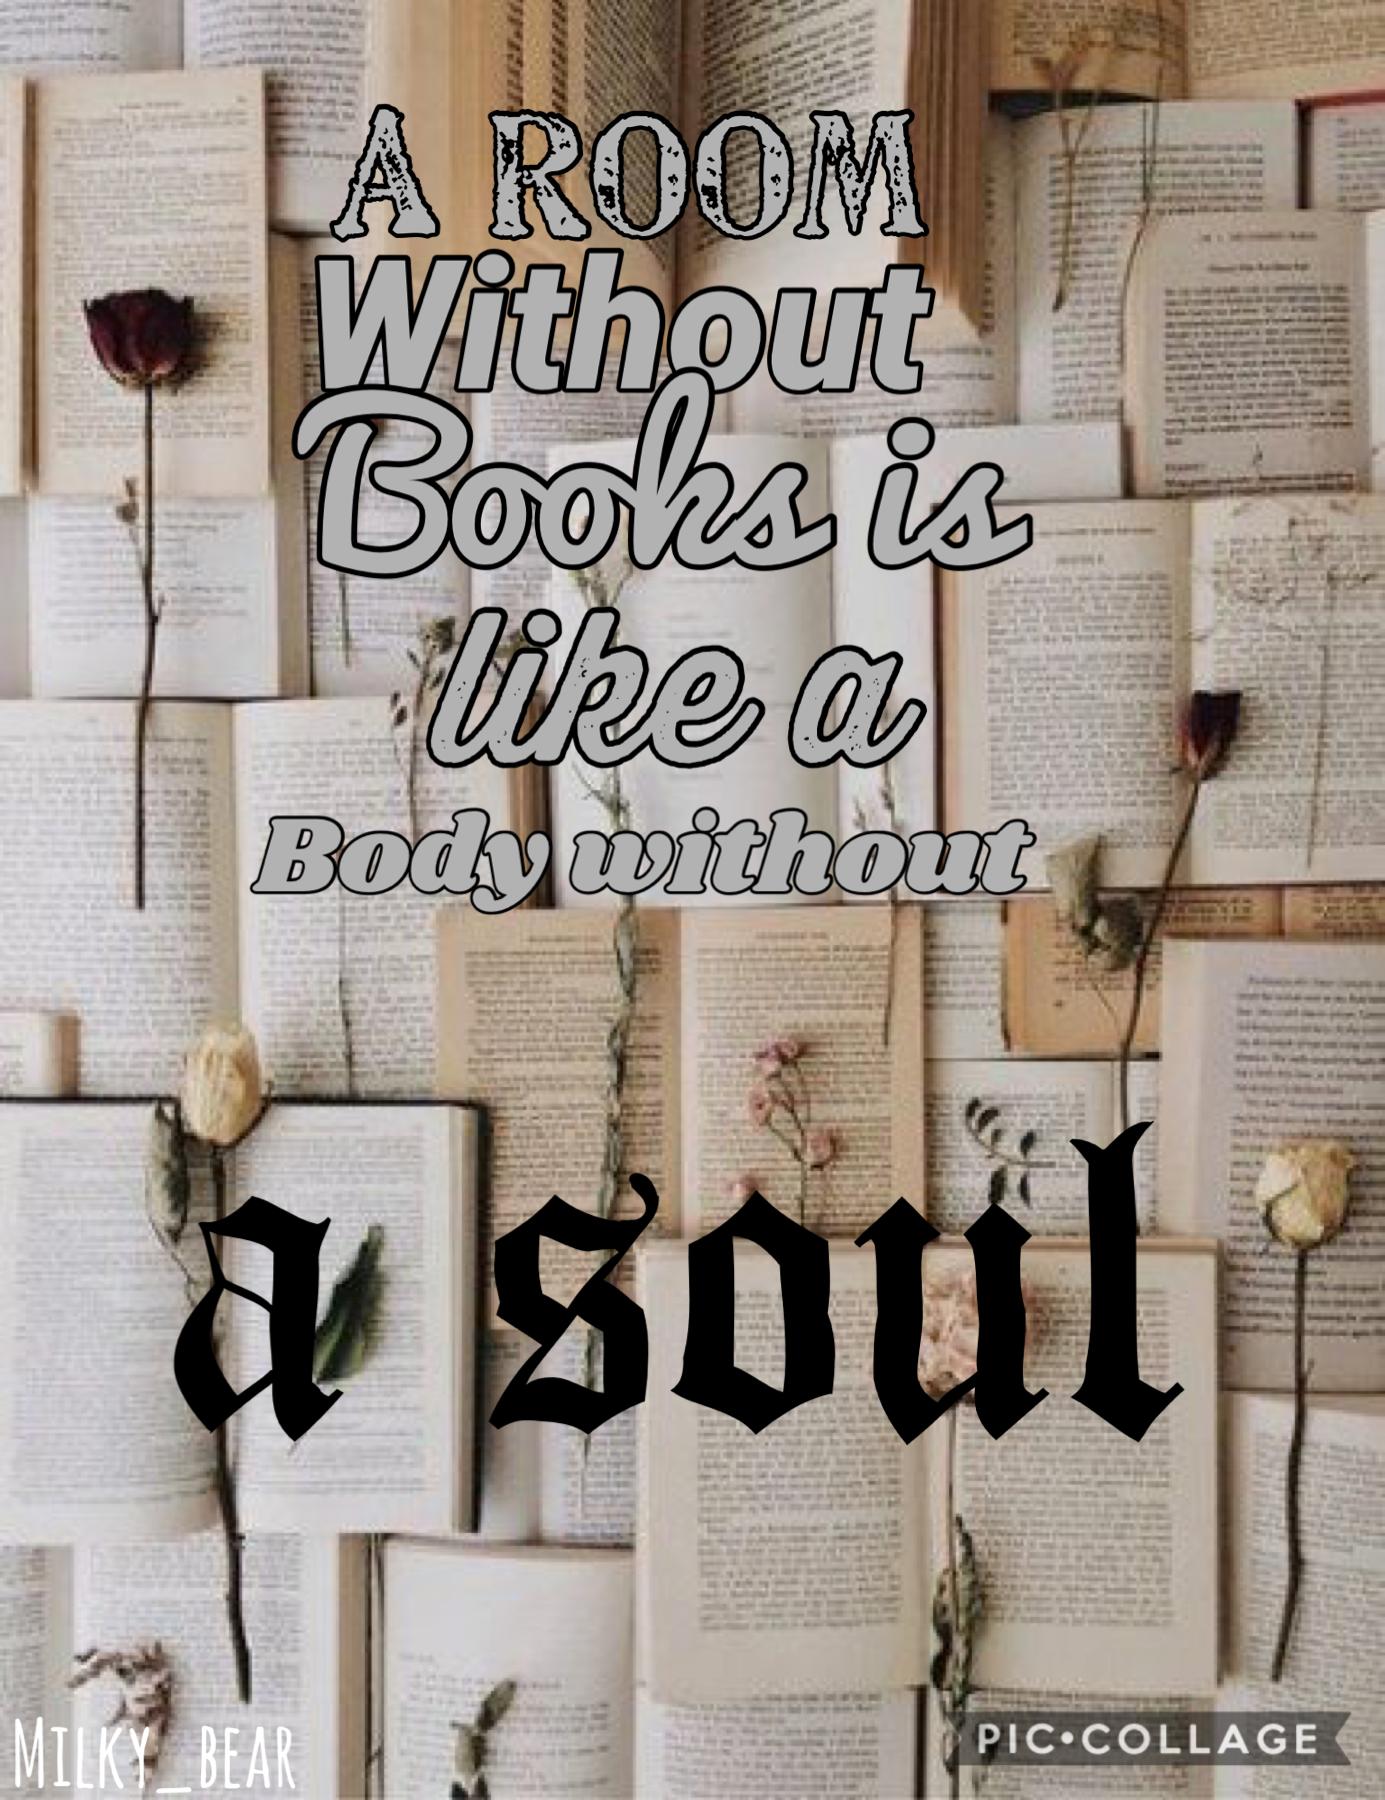 Quote “a room without books is like a body without a soul”  QOTD: Whats your favourite book or series of books.  AOTD I don’t have a favourite book or series I like lots if books but lately I’ve been ready the puppy diary books there new and really good b